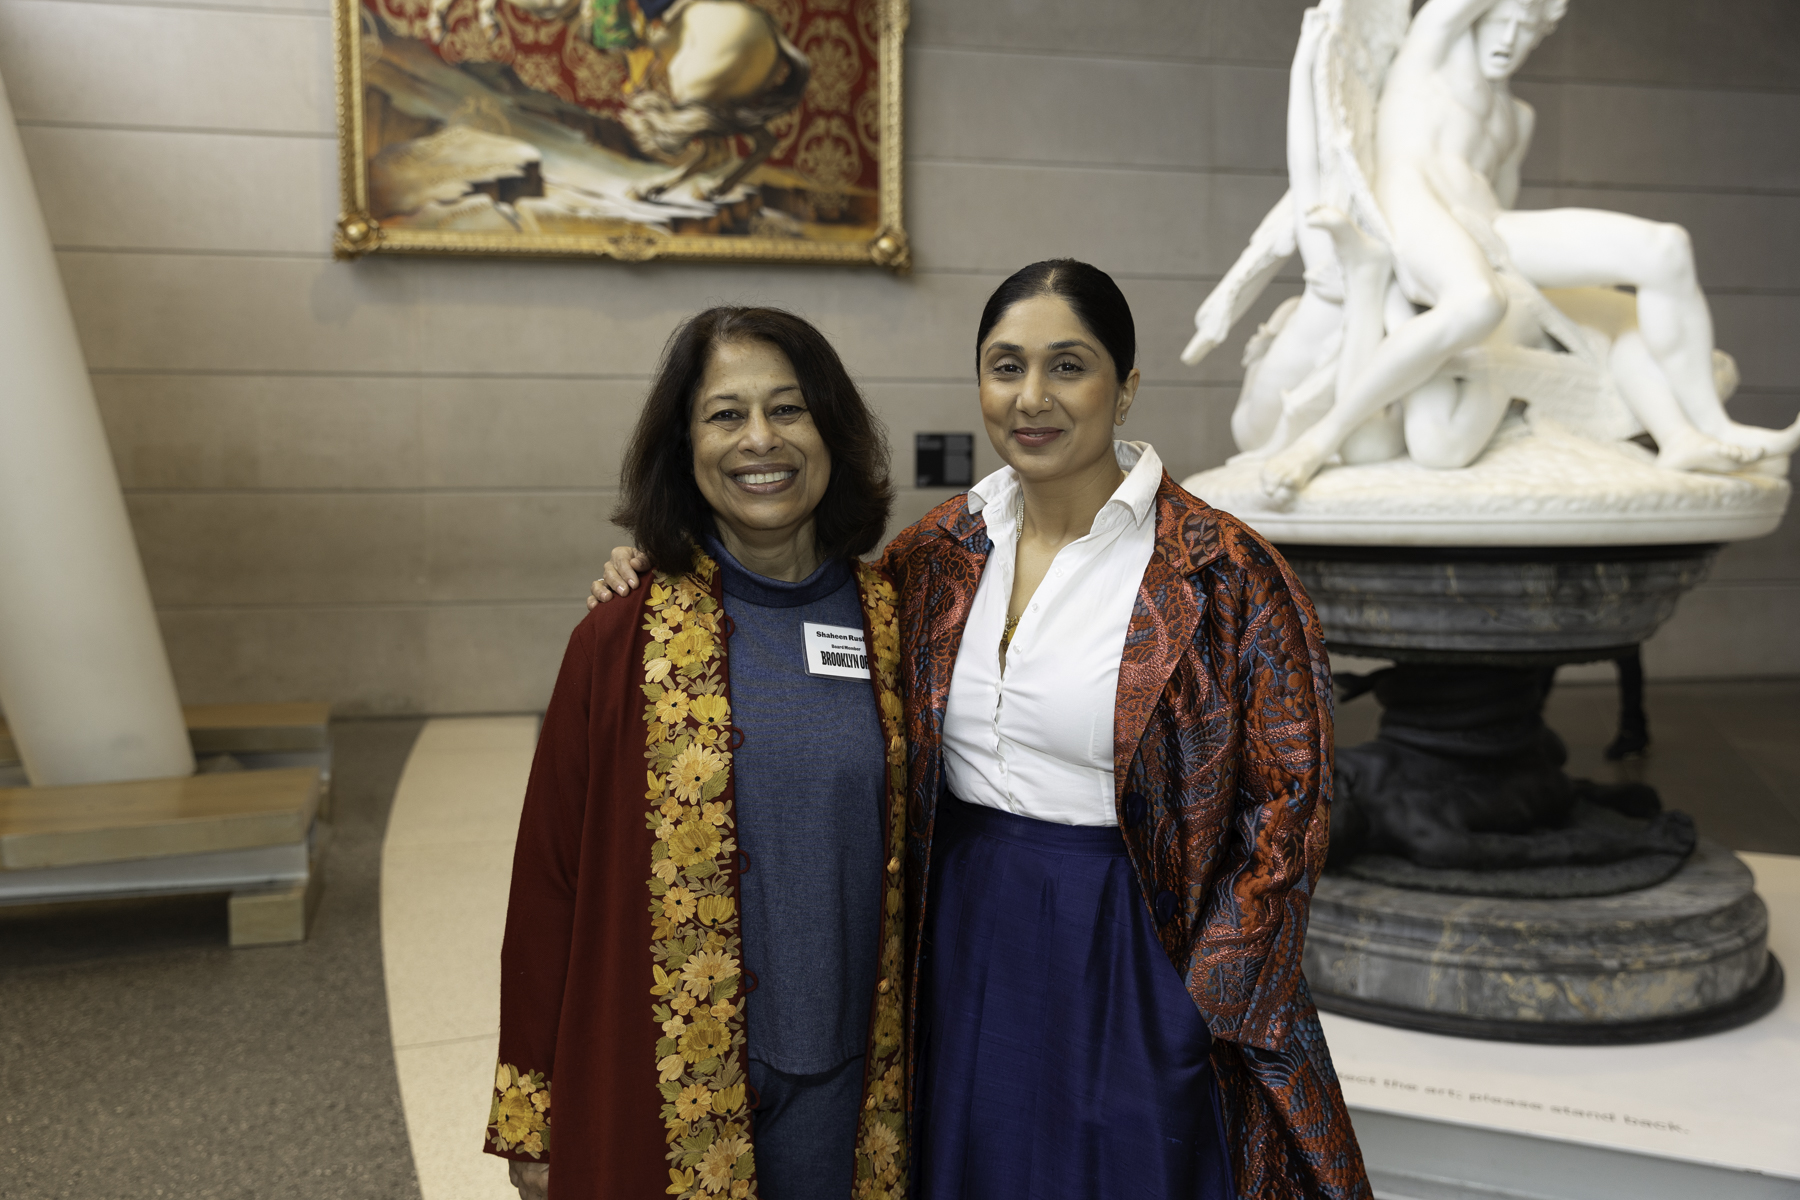 Two women smiling for a photo in an art gallery with paintings and a sculpture in the background.